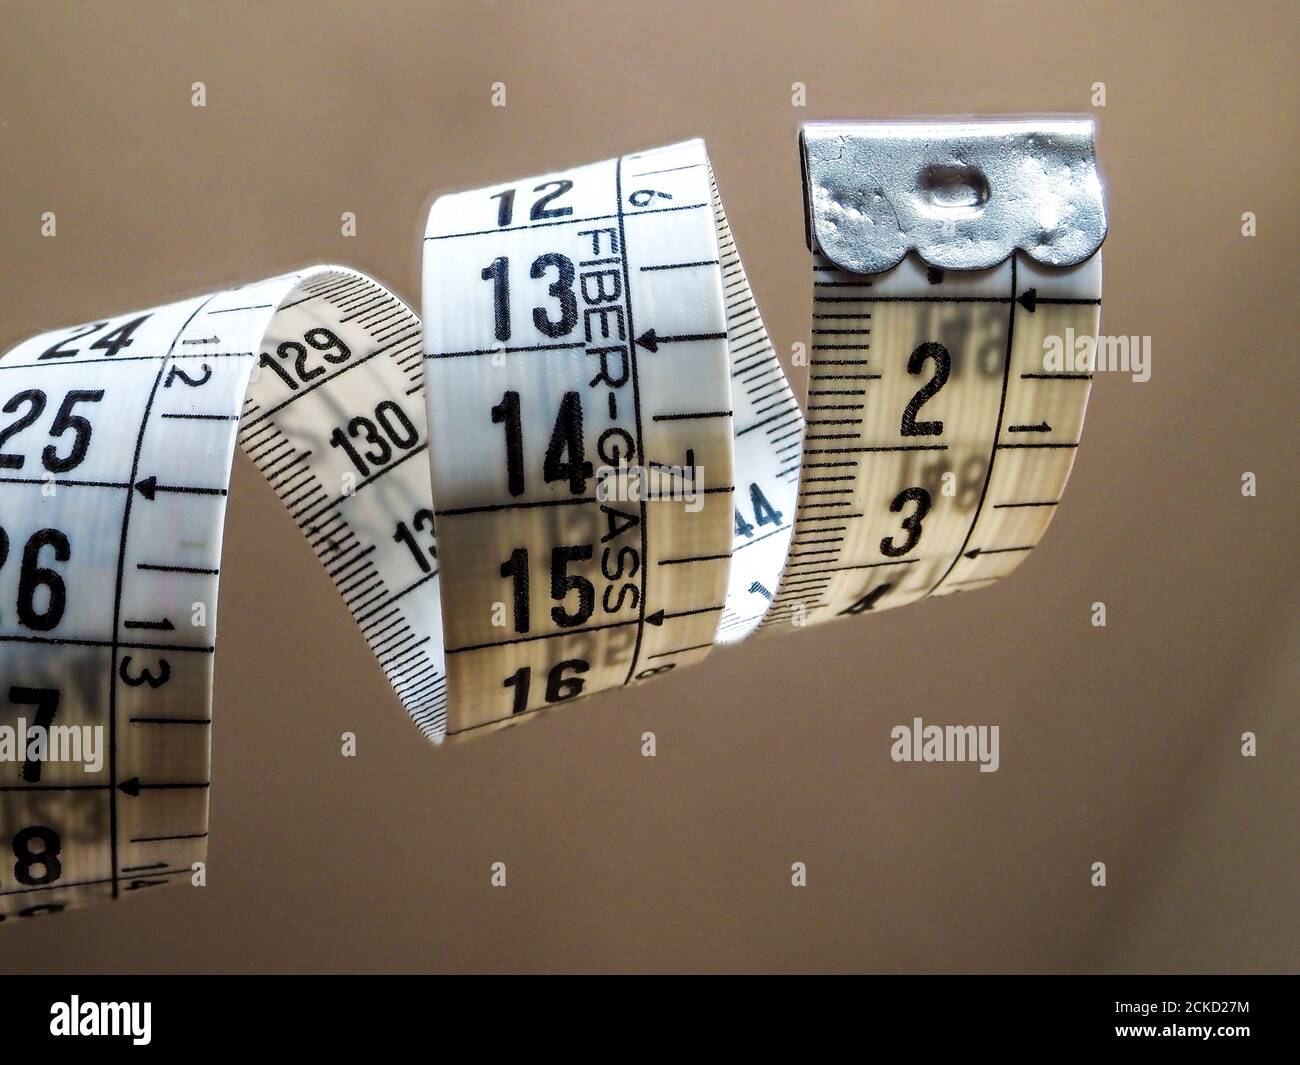 Tape Measure Used by Dressmakers and Tailors Stock Image - Image